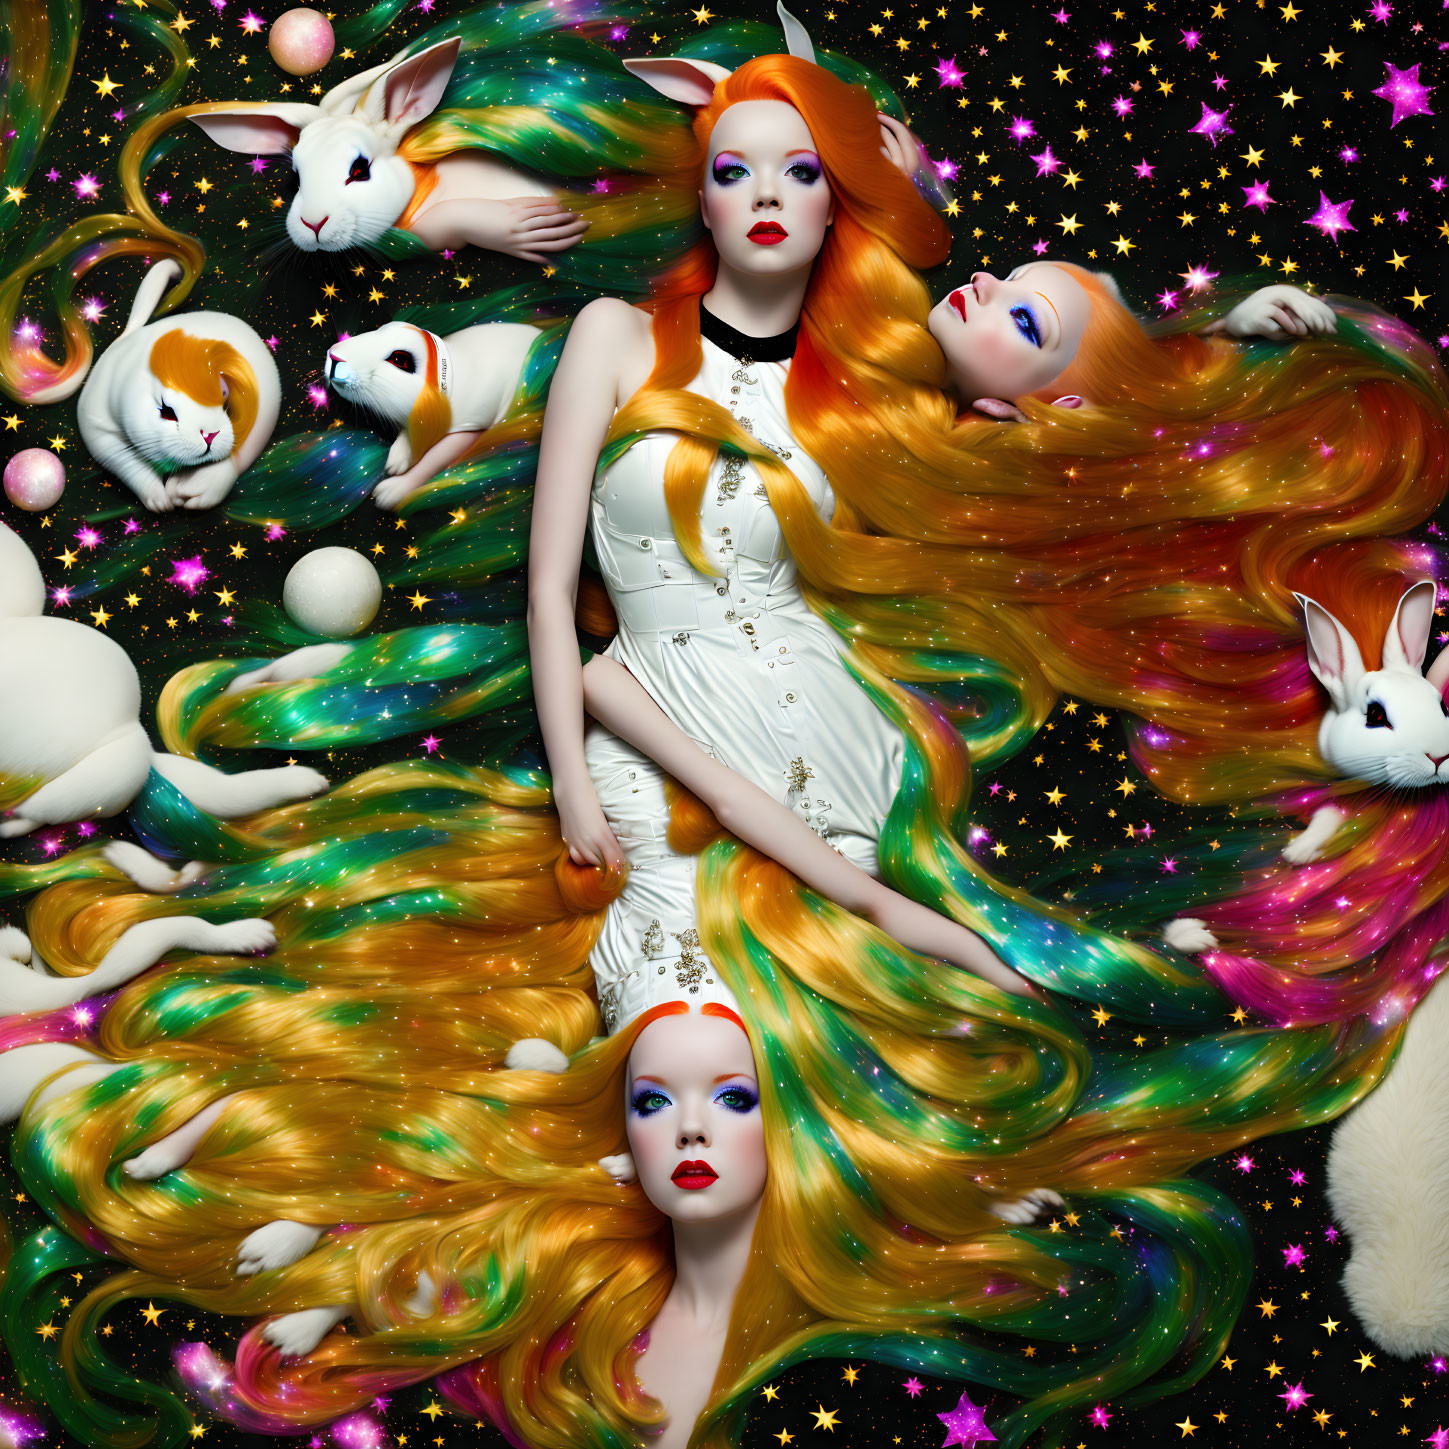 Two Women with Vibrant Hair Surrounded by Rabbits and Stars